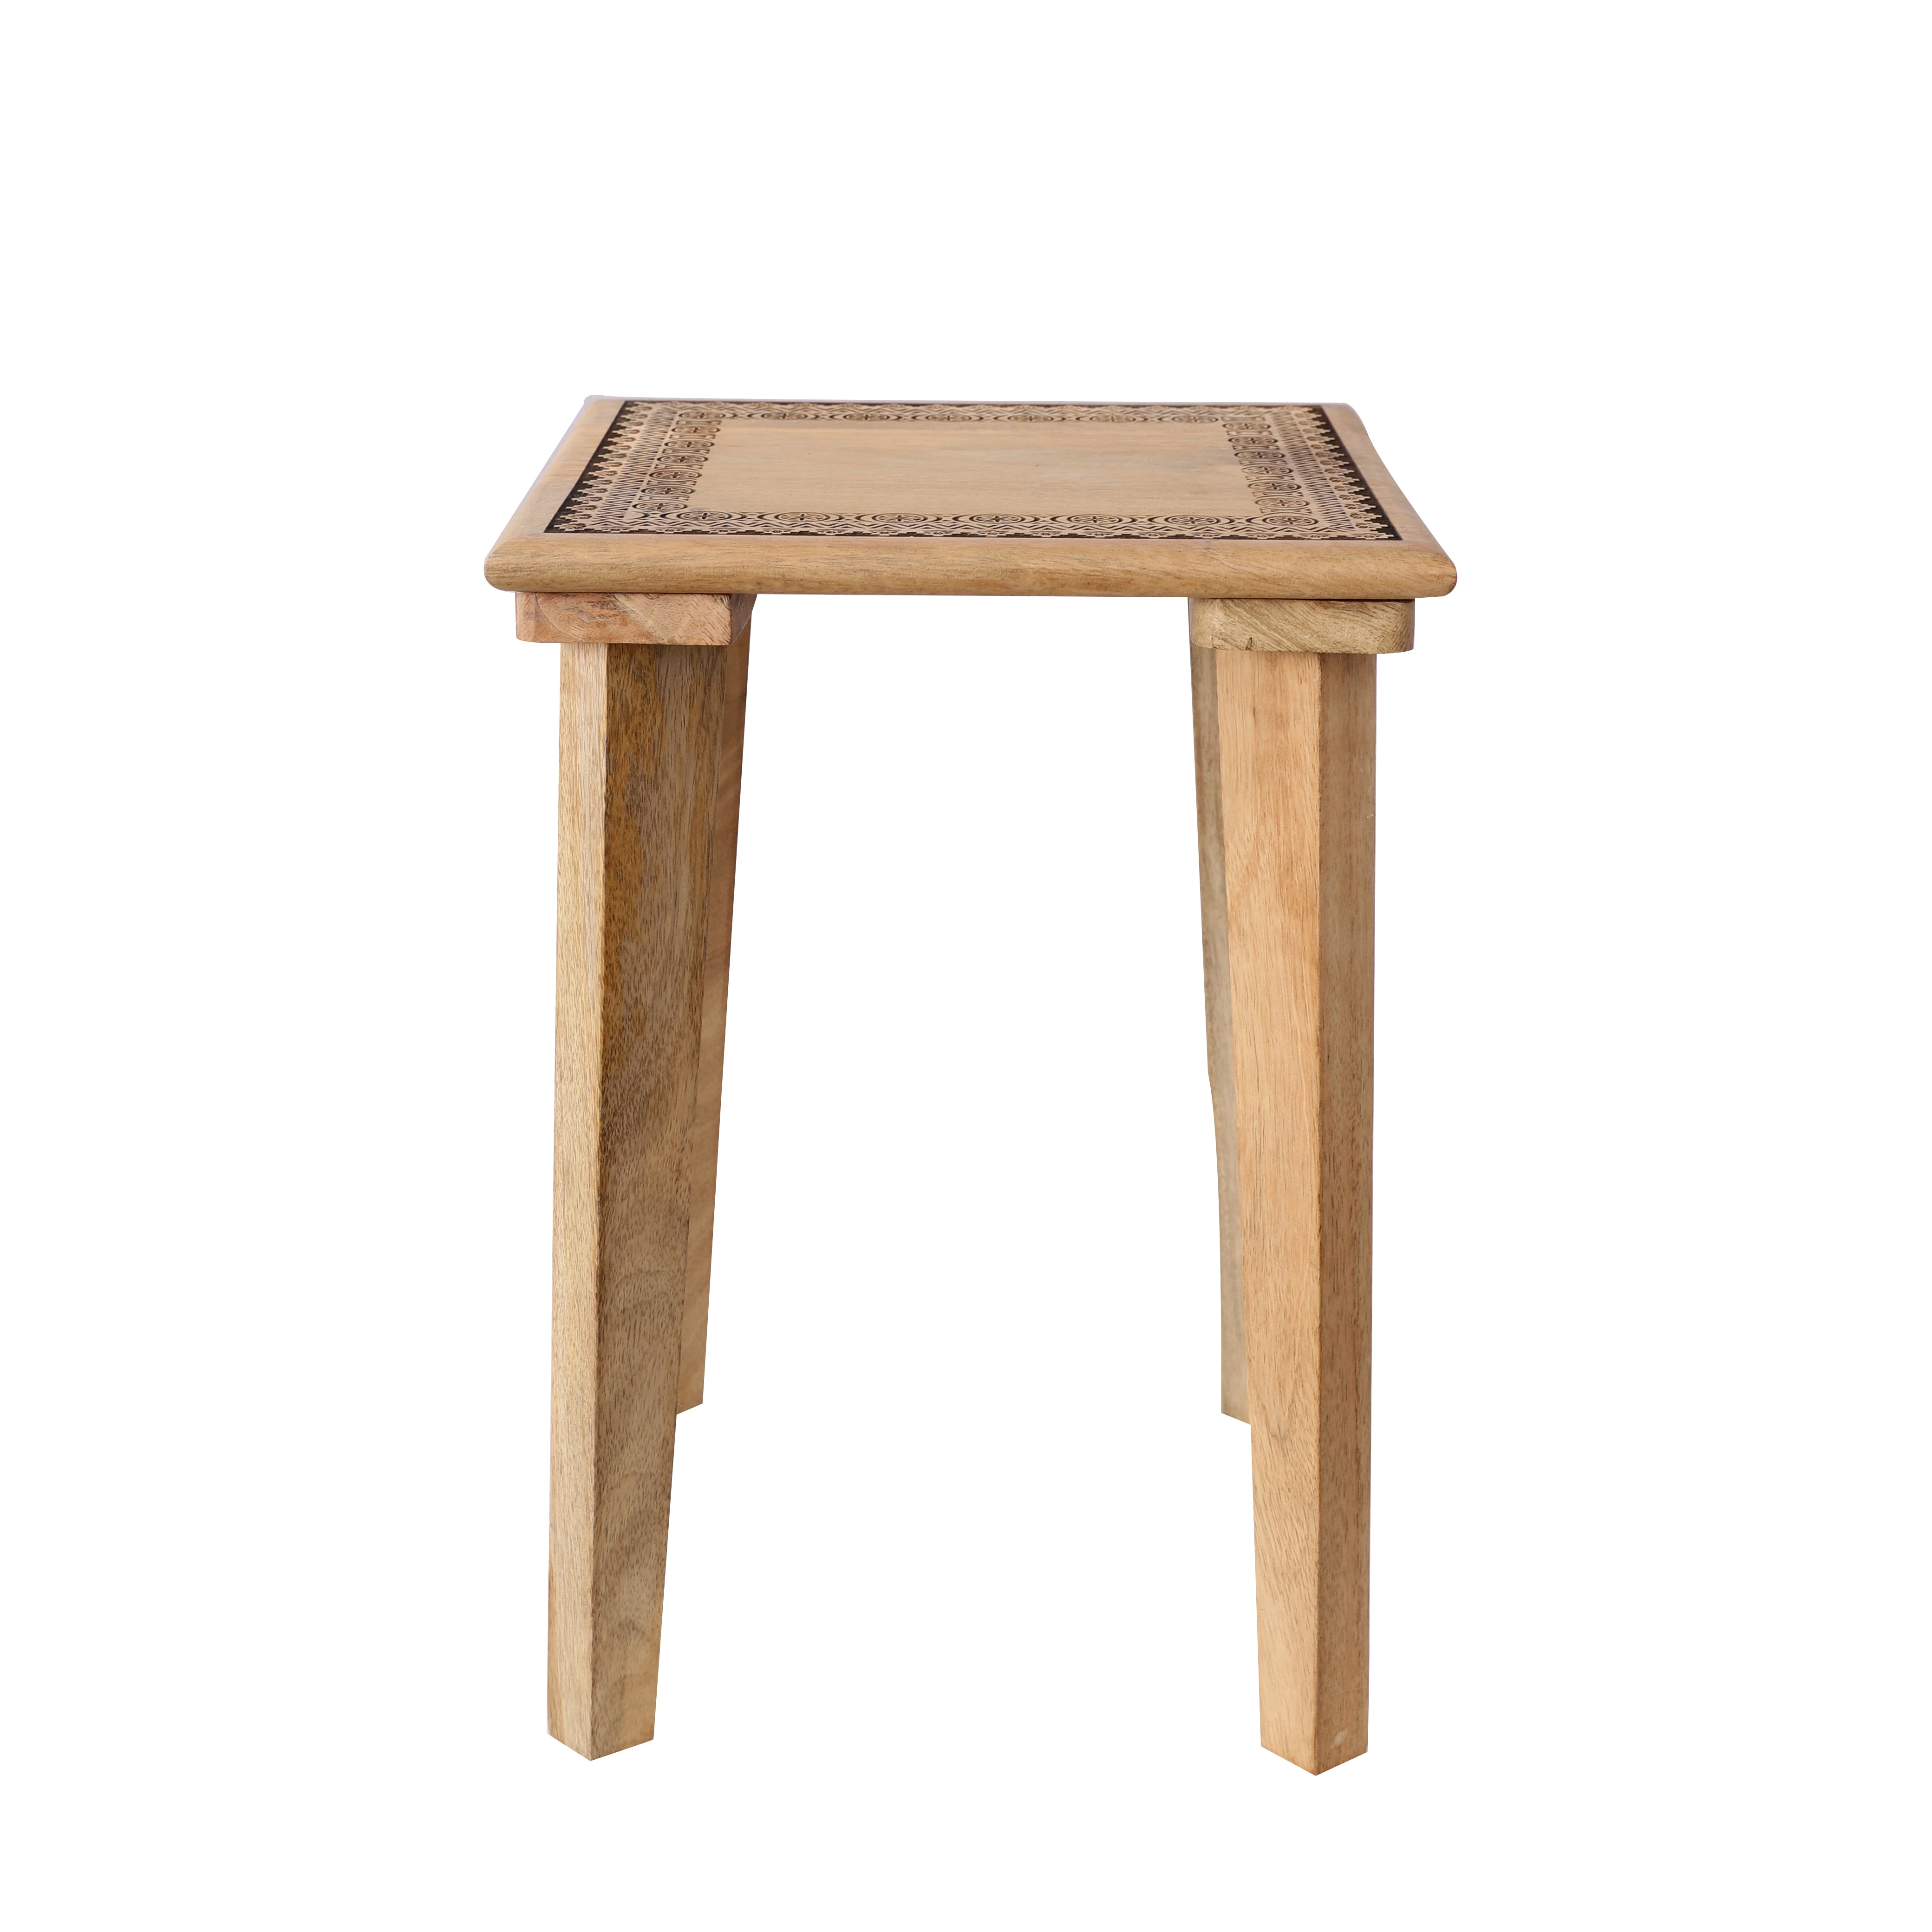 Square Wooden Table/Stool